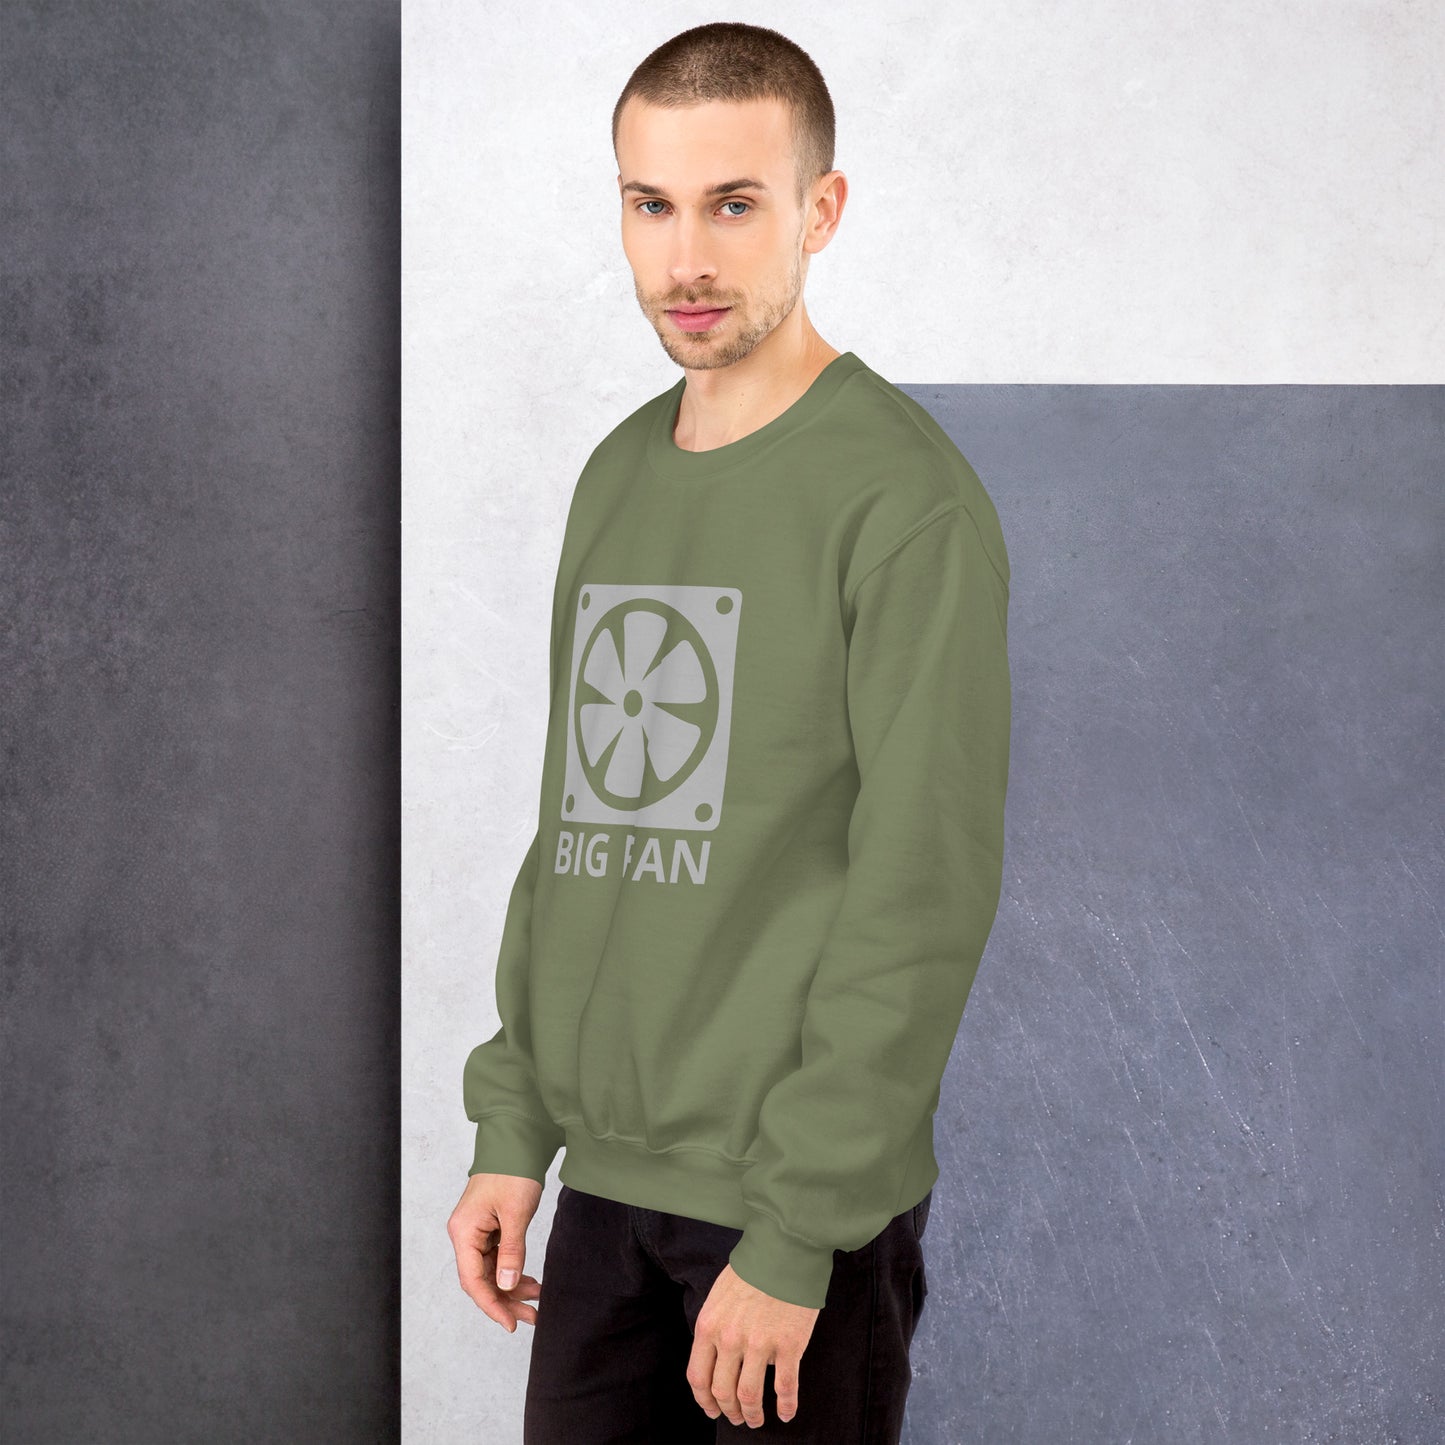 Men with military green sweatshirt with image of a big computer fan and the text "BIG FAN"